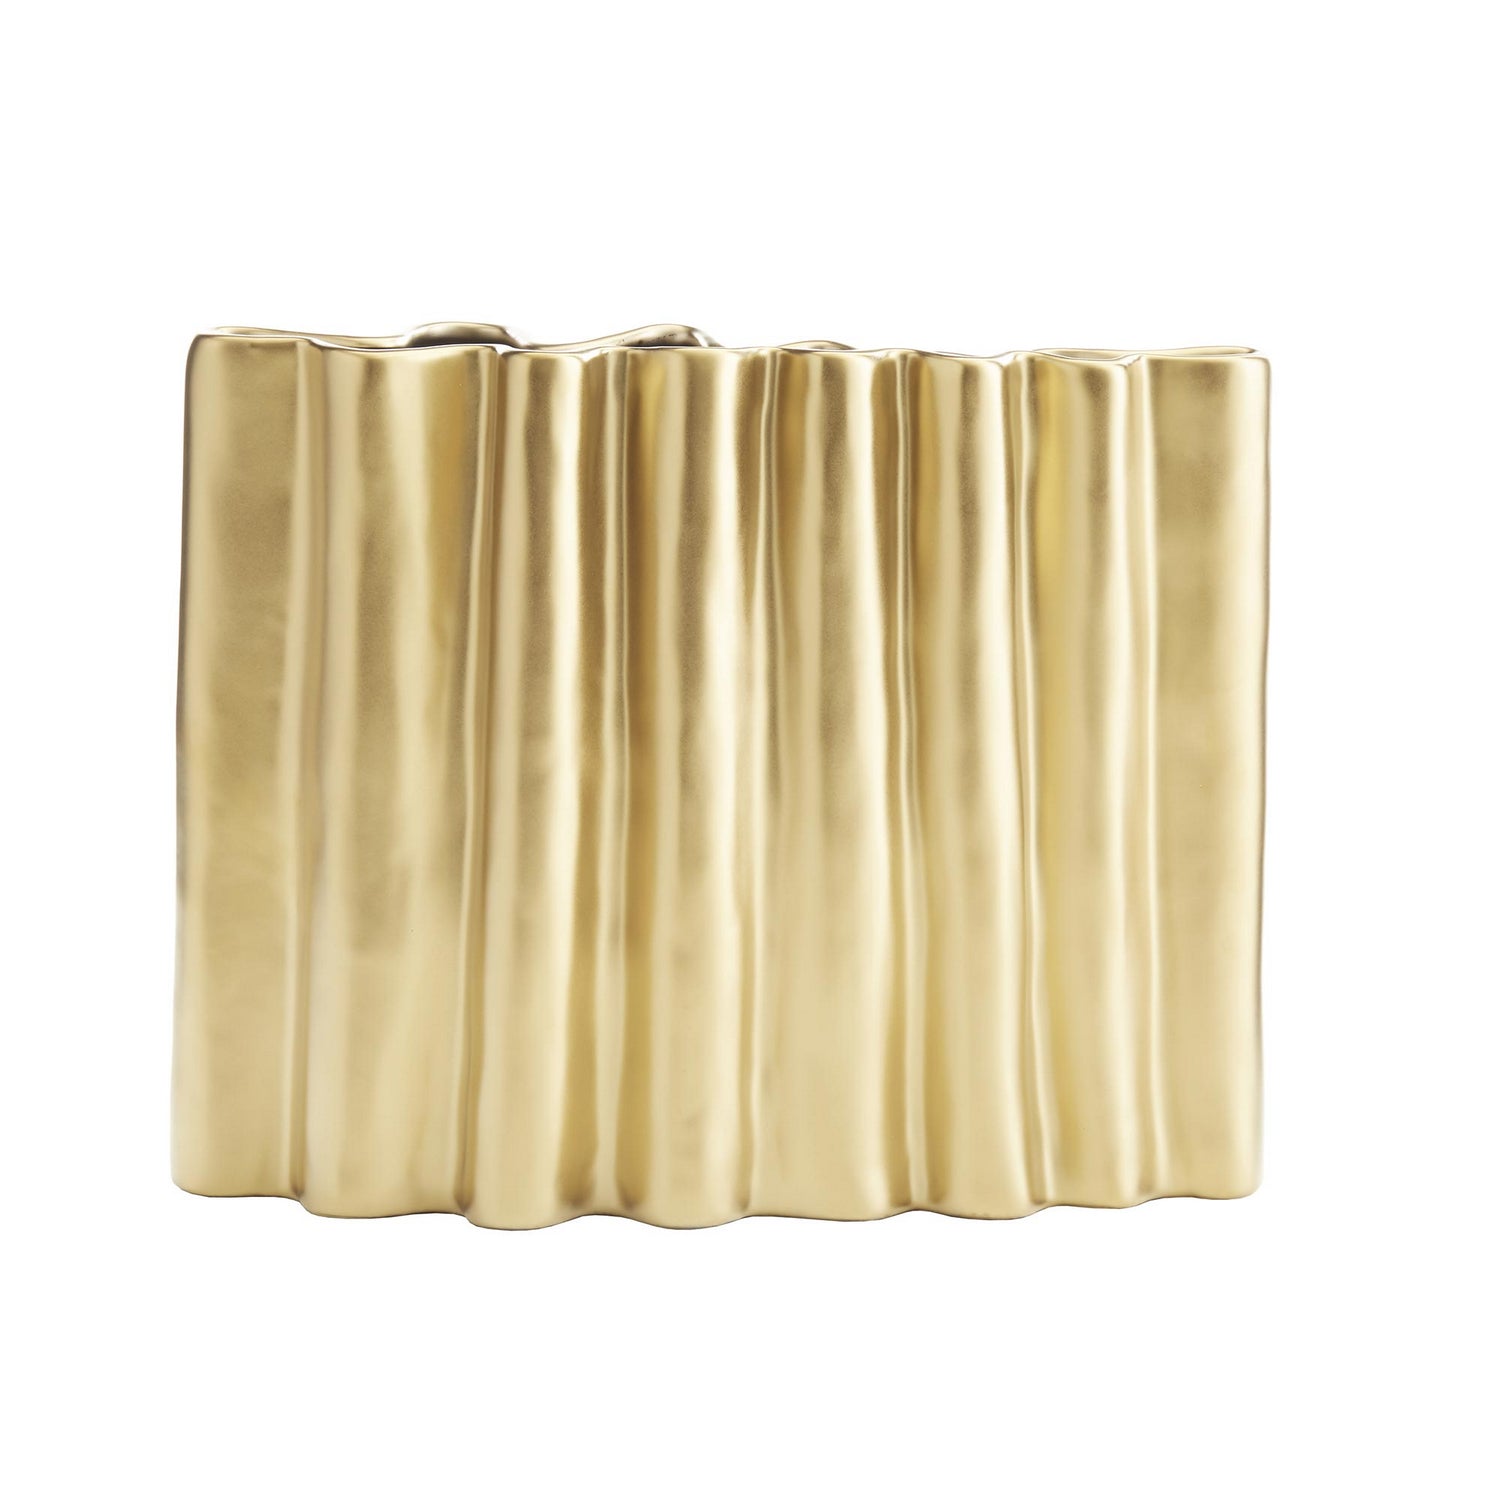 Vase from the Howey collection in Gold finish